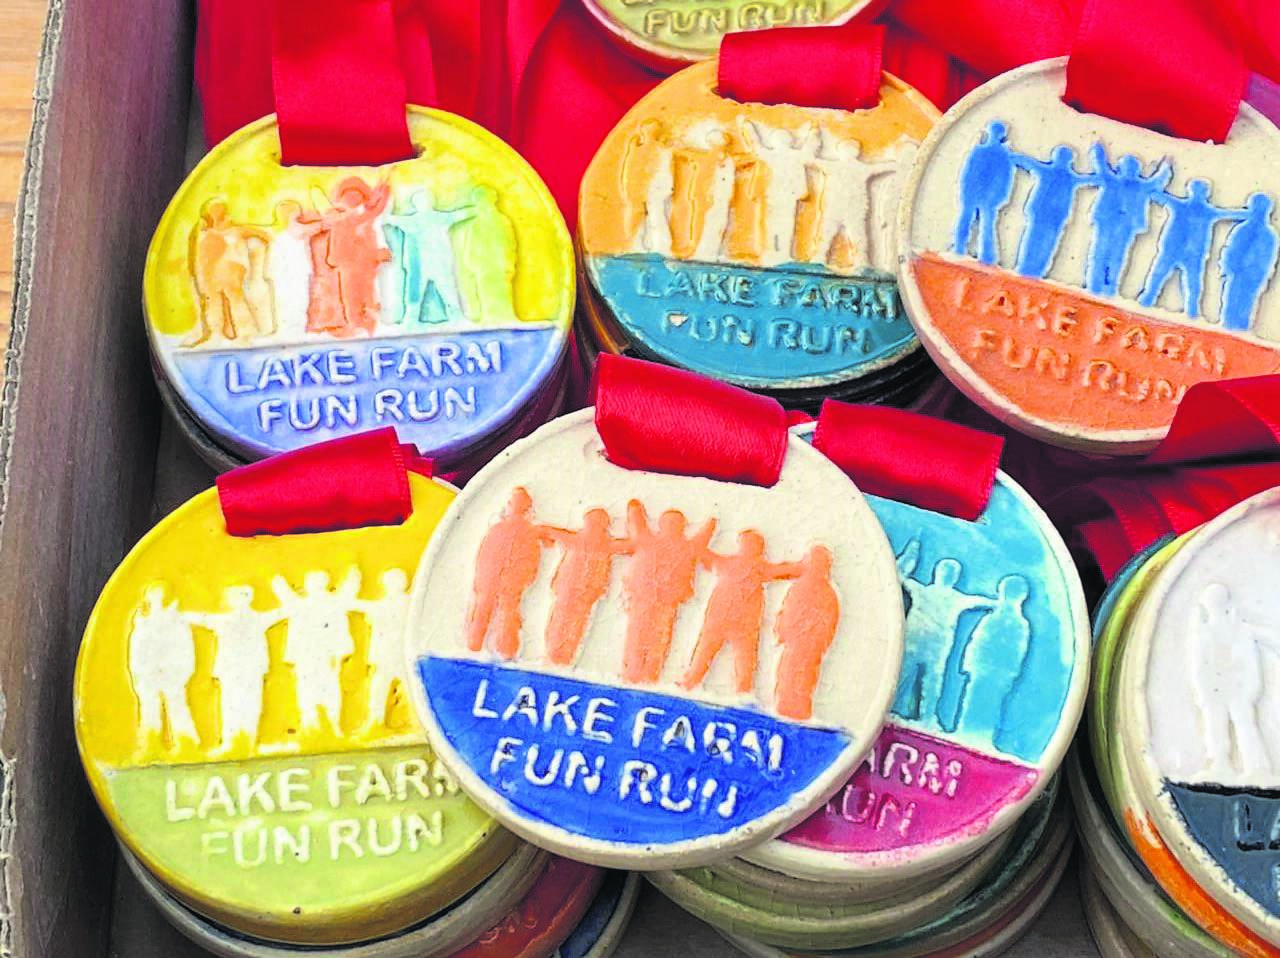 The unique medals for the Lake Farm Centre’s Charity Run (5km, 10km or 25km) made by the centre’s residents. This annual fundraising fun event will be held on Saturday, 11 March. 